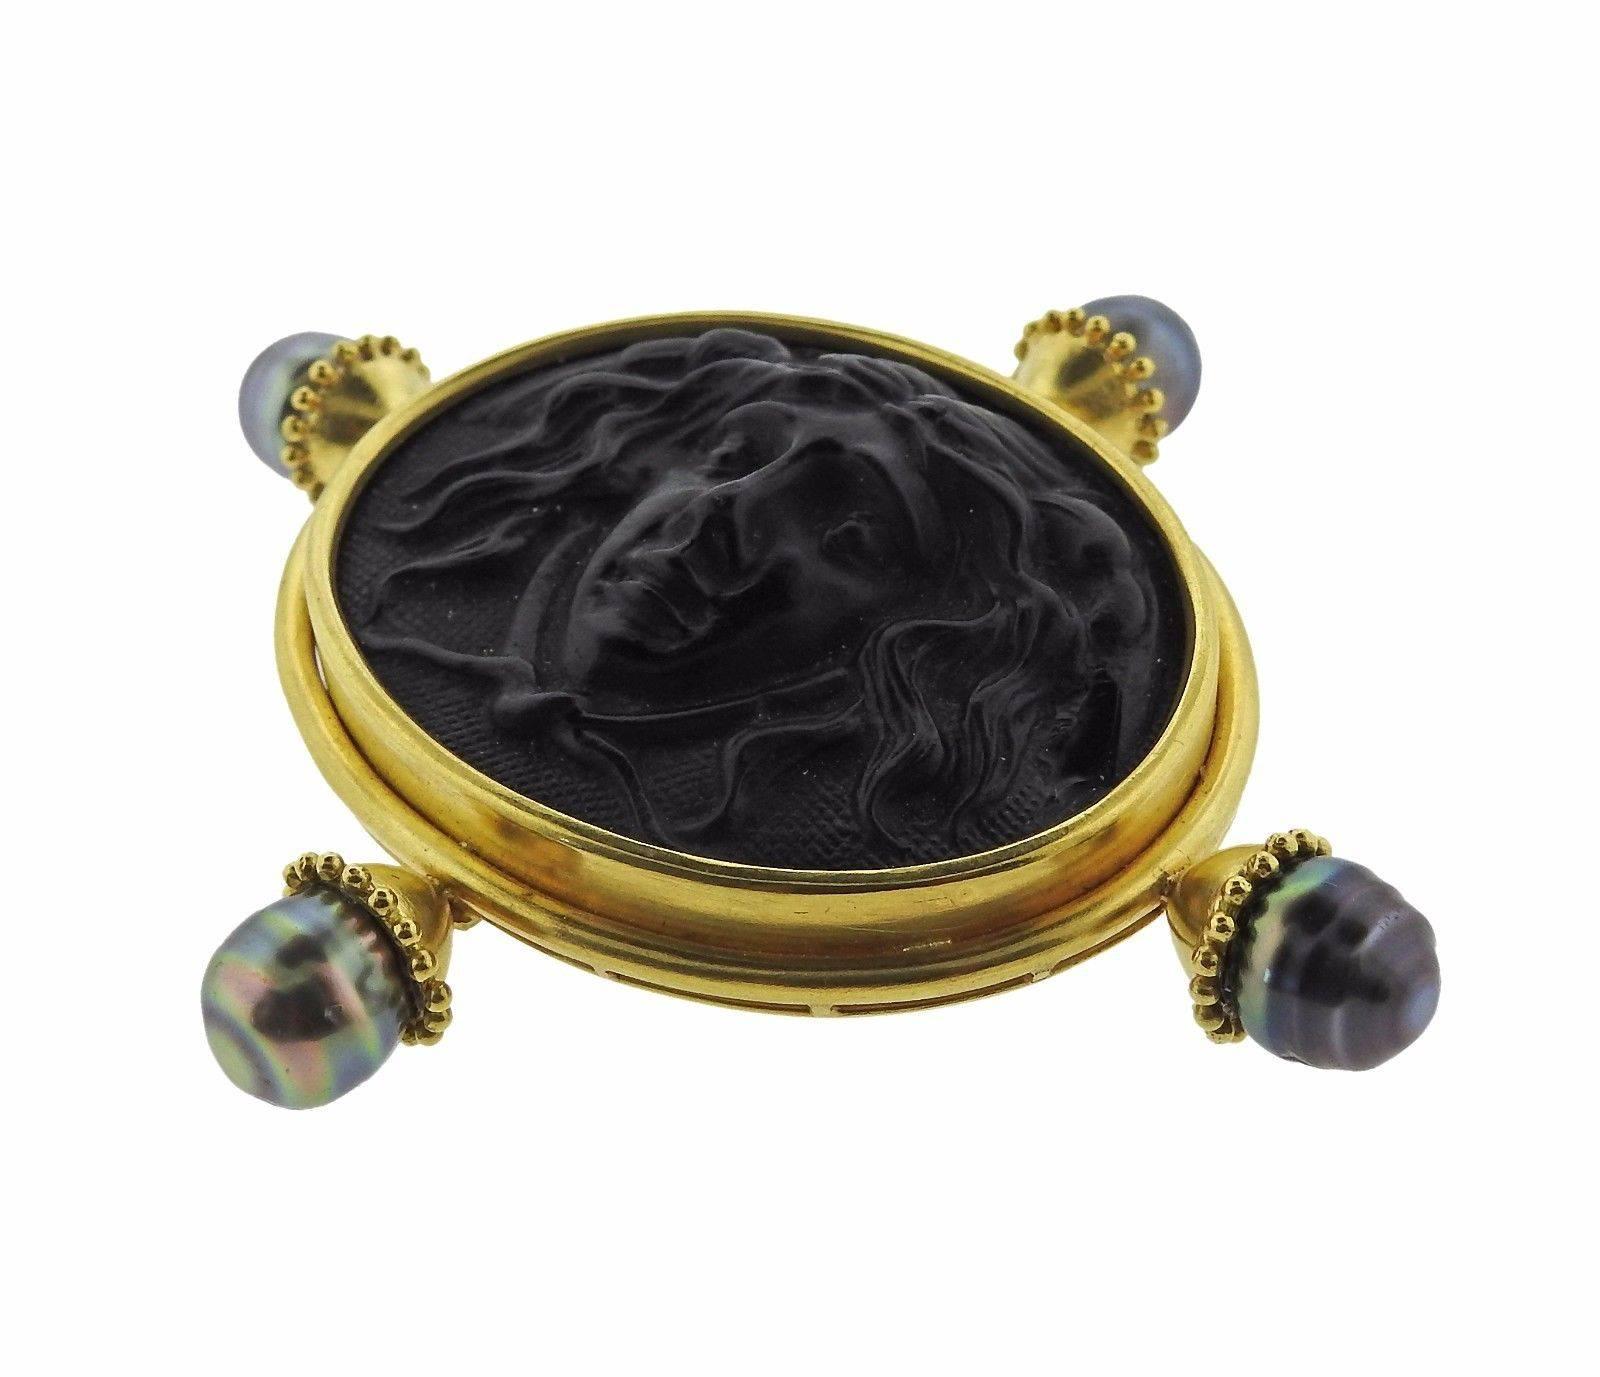 An 18k yellow gold brooch set with black intaglio and 10.5mm pearls.  The brooch measures 87mm x 78mm and weighs 70.5 grams.  Marked: 18k, Locke mark.